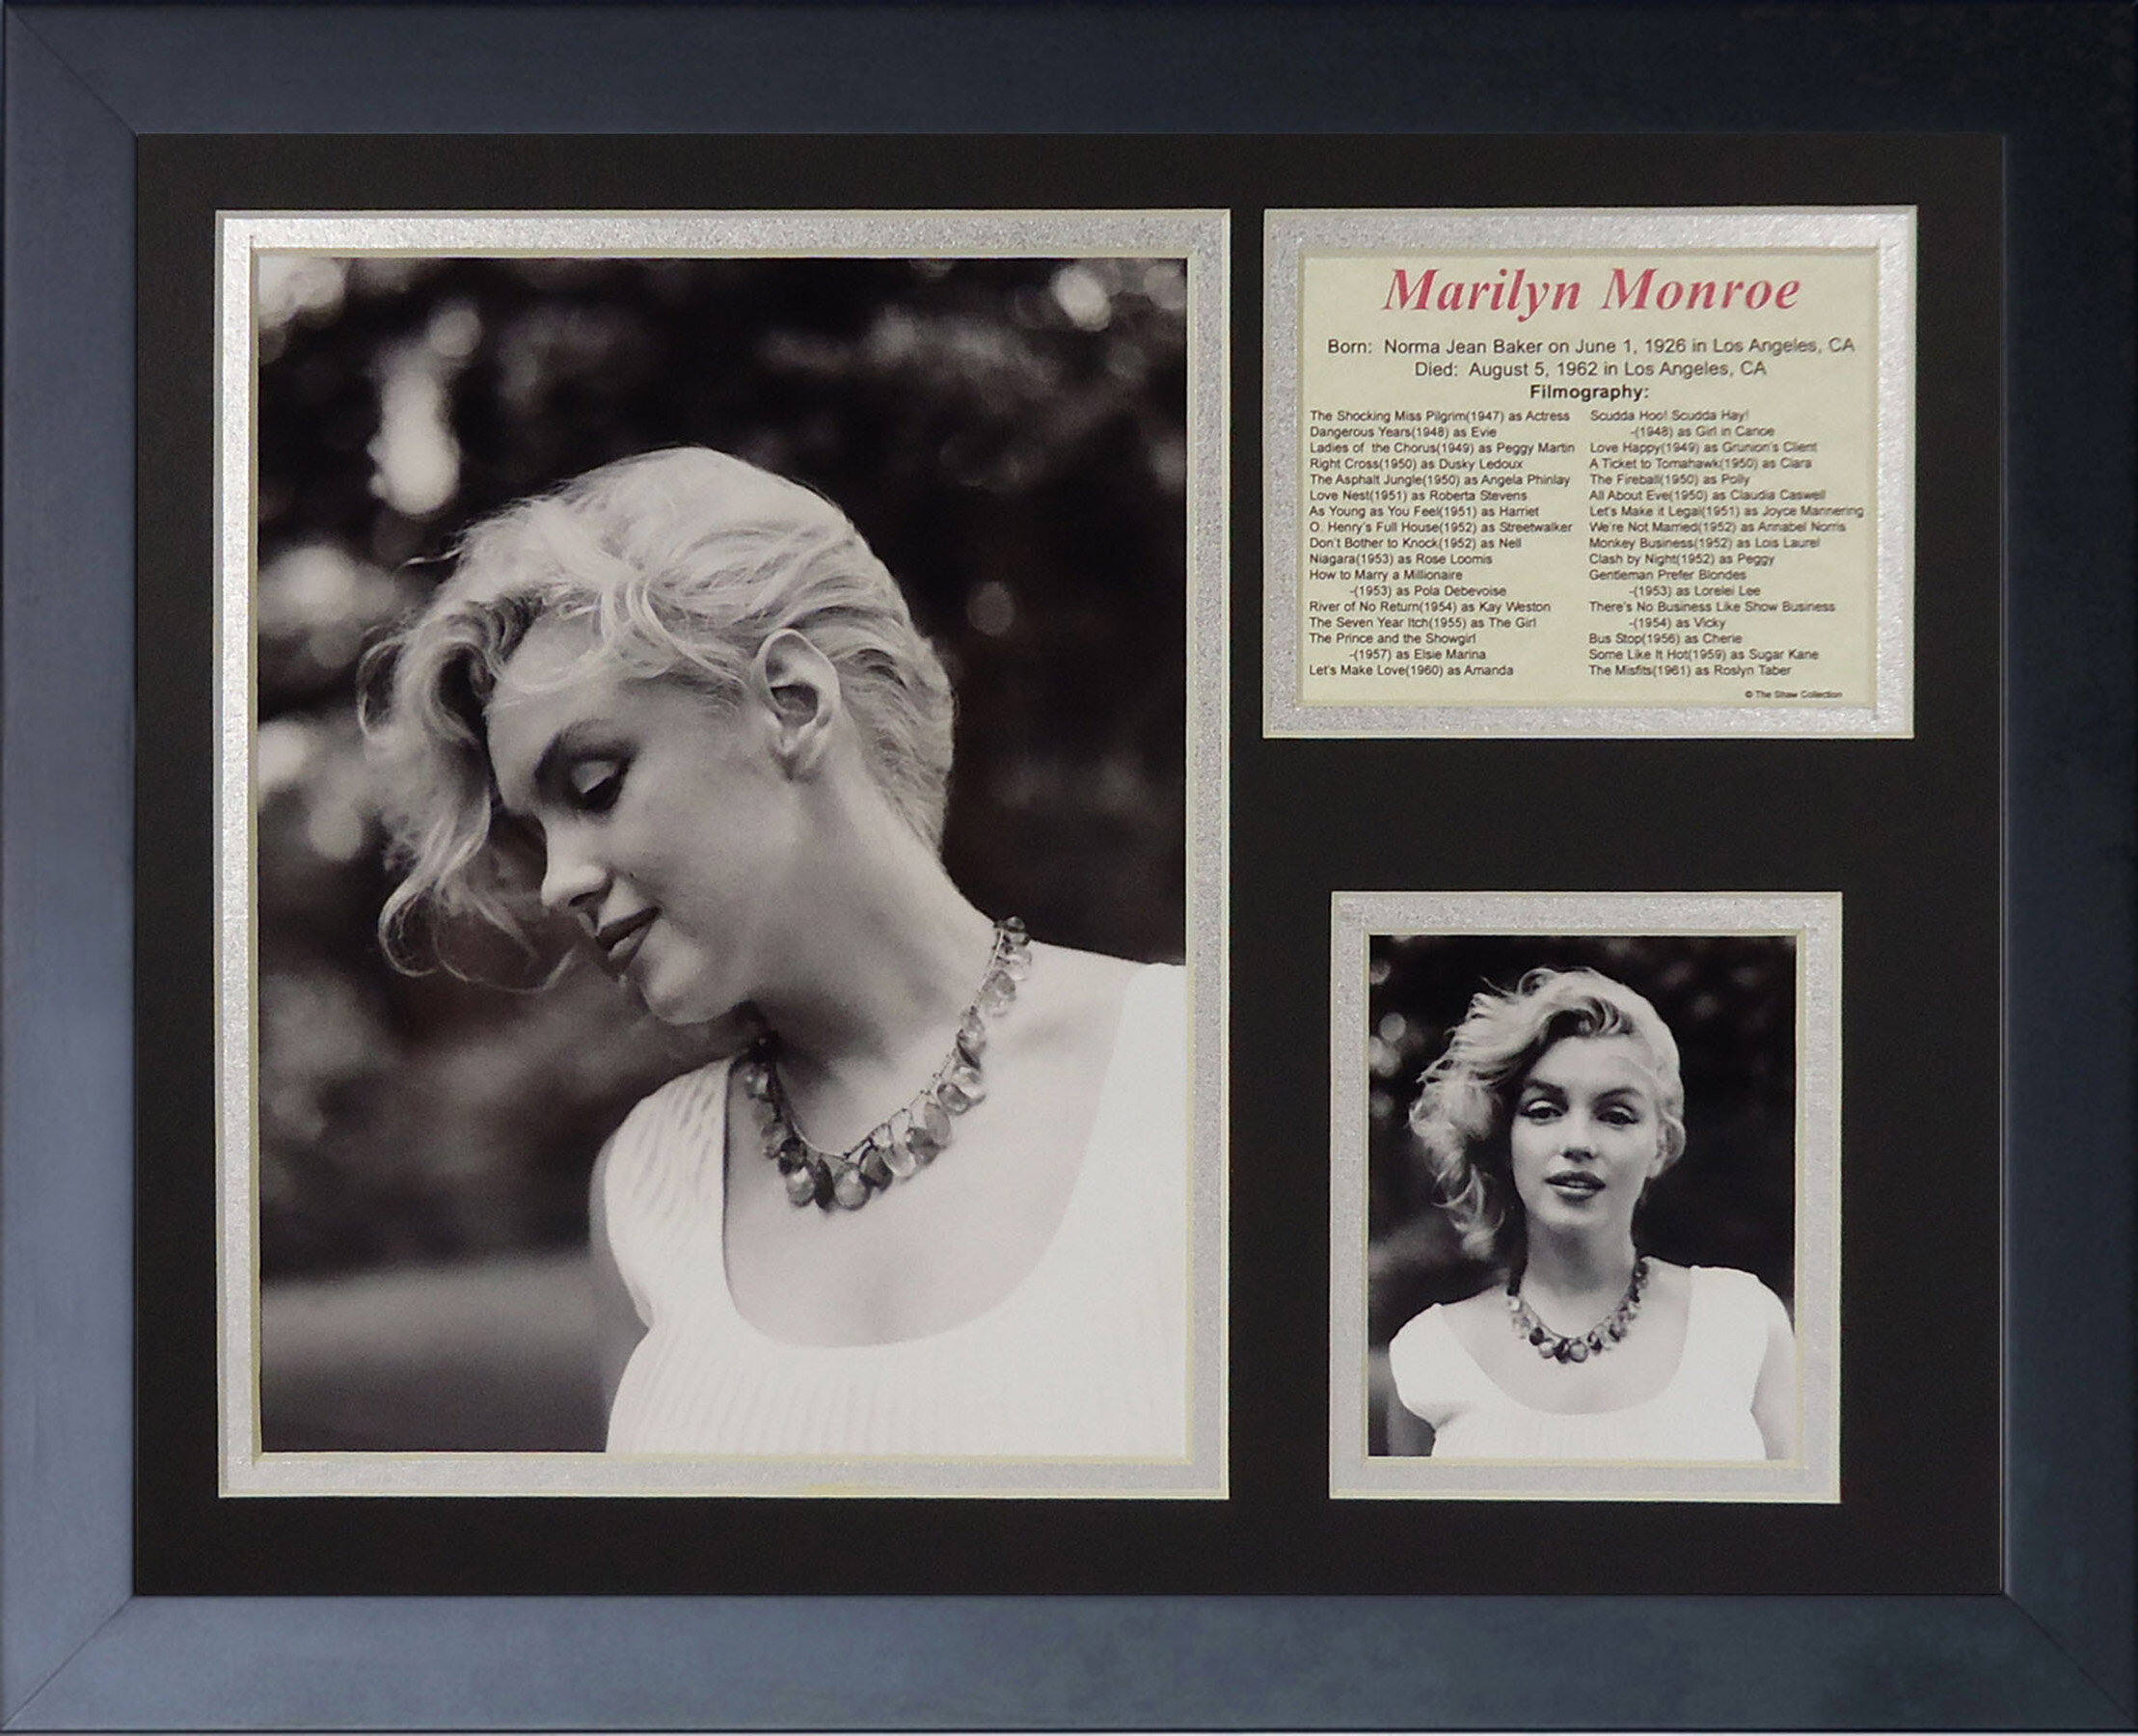 Legends Never Die Marilyn Monroe Framed Photo Collage 11 by 14-Inch